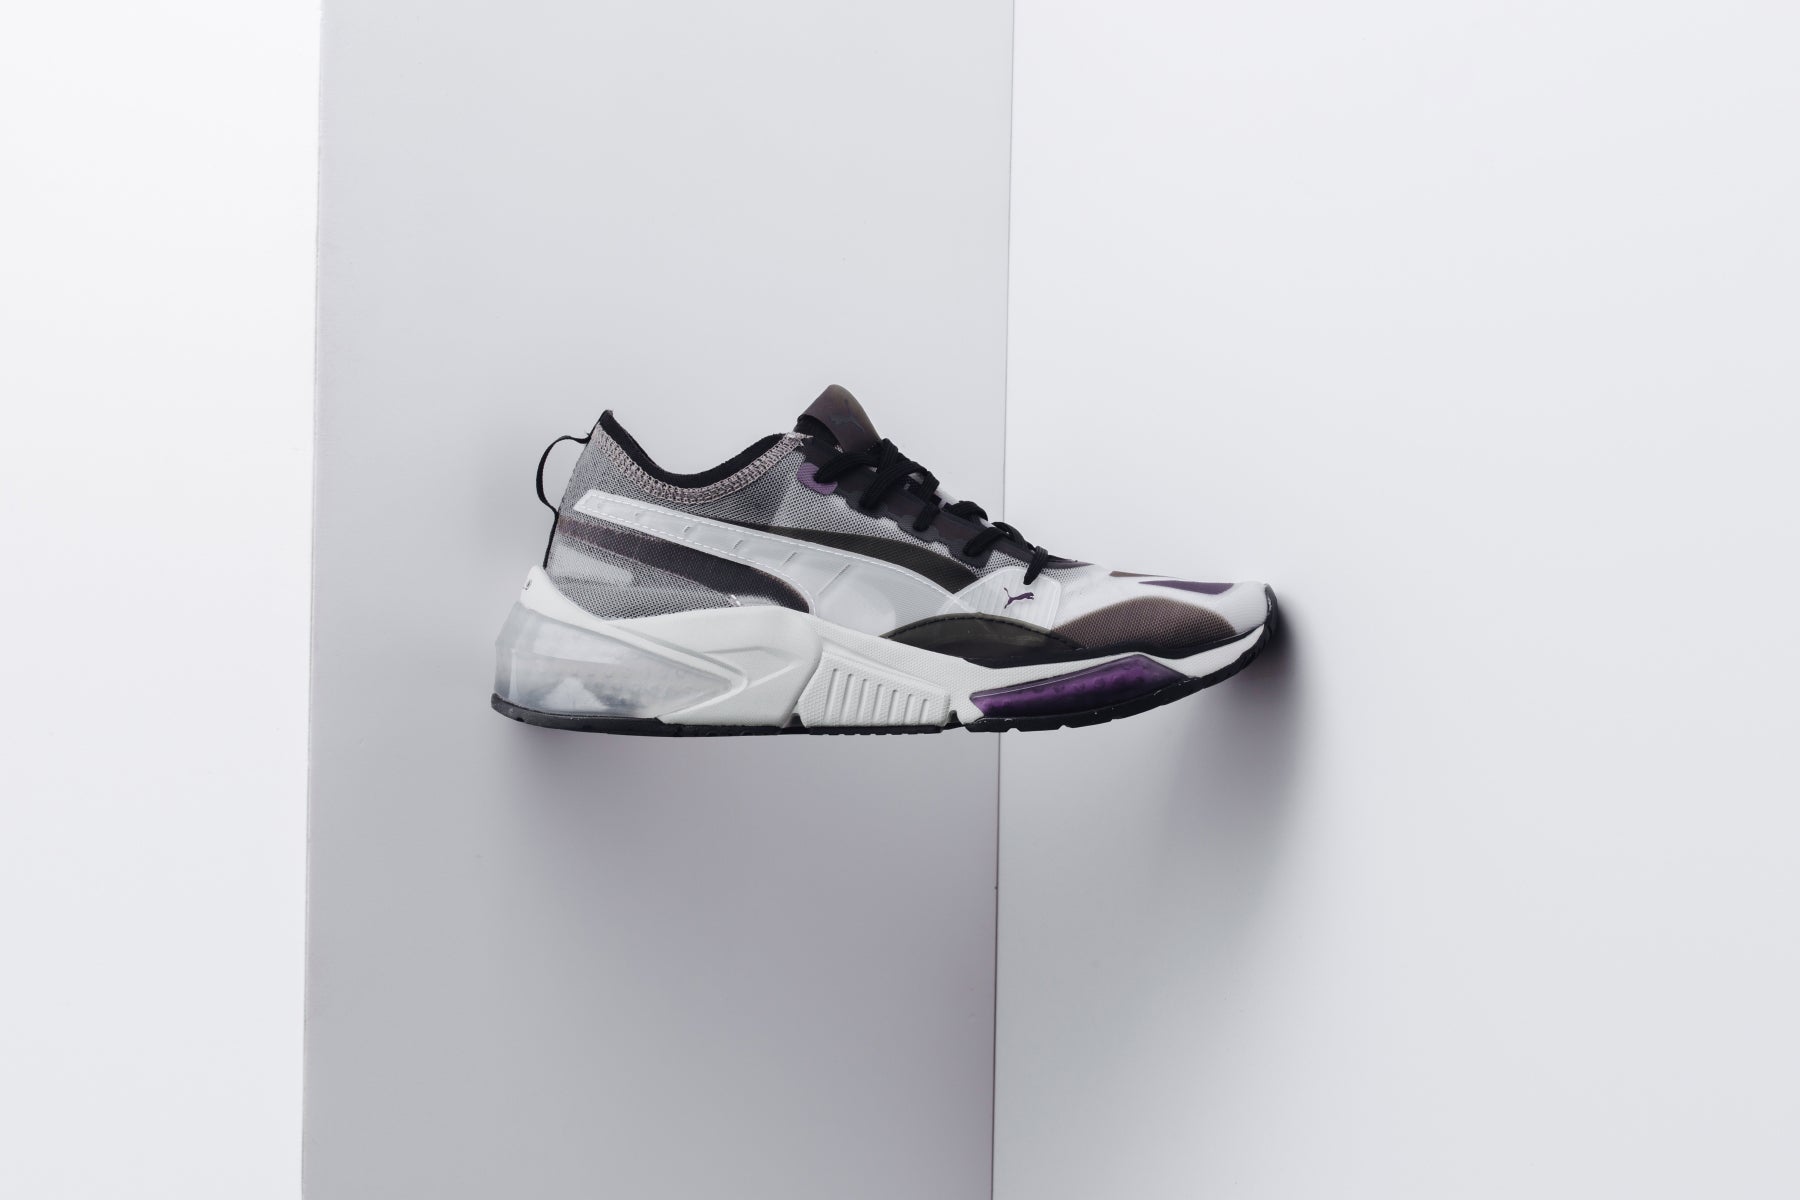 Puma LQD Cell Sheer "Gray Violet-Puma Black" Available Now Feature